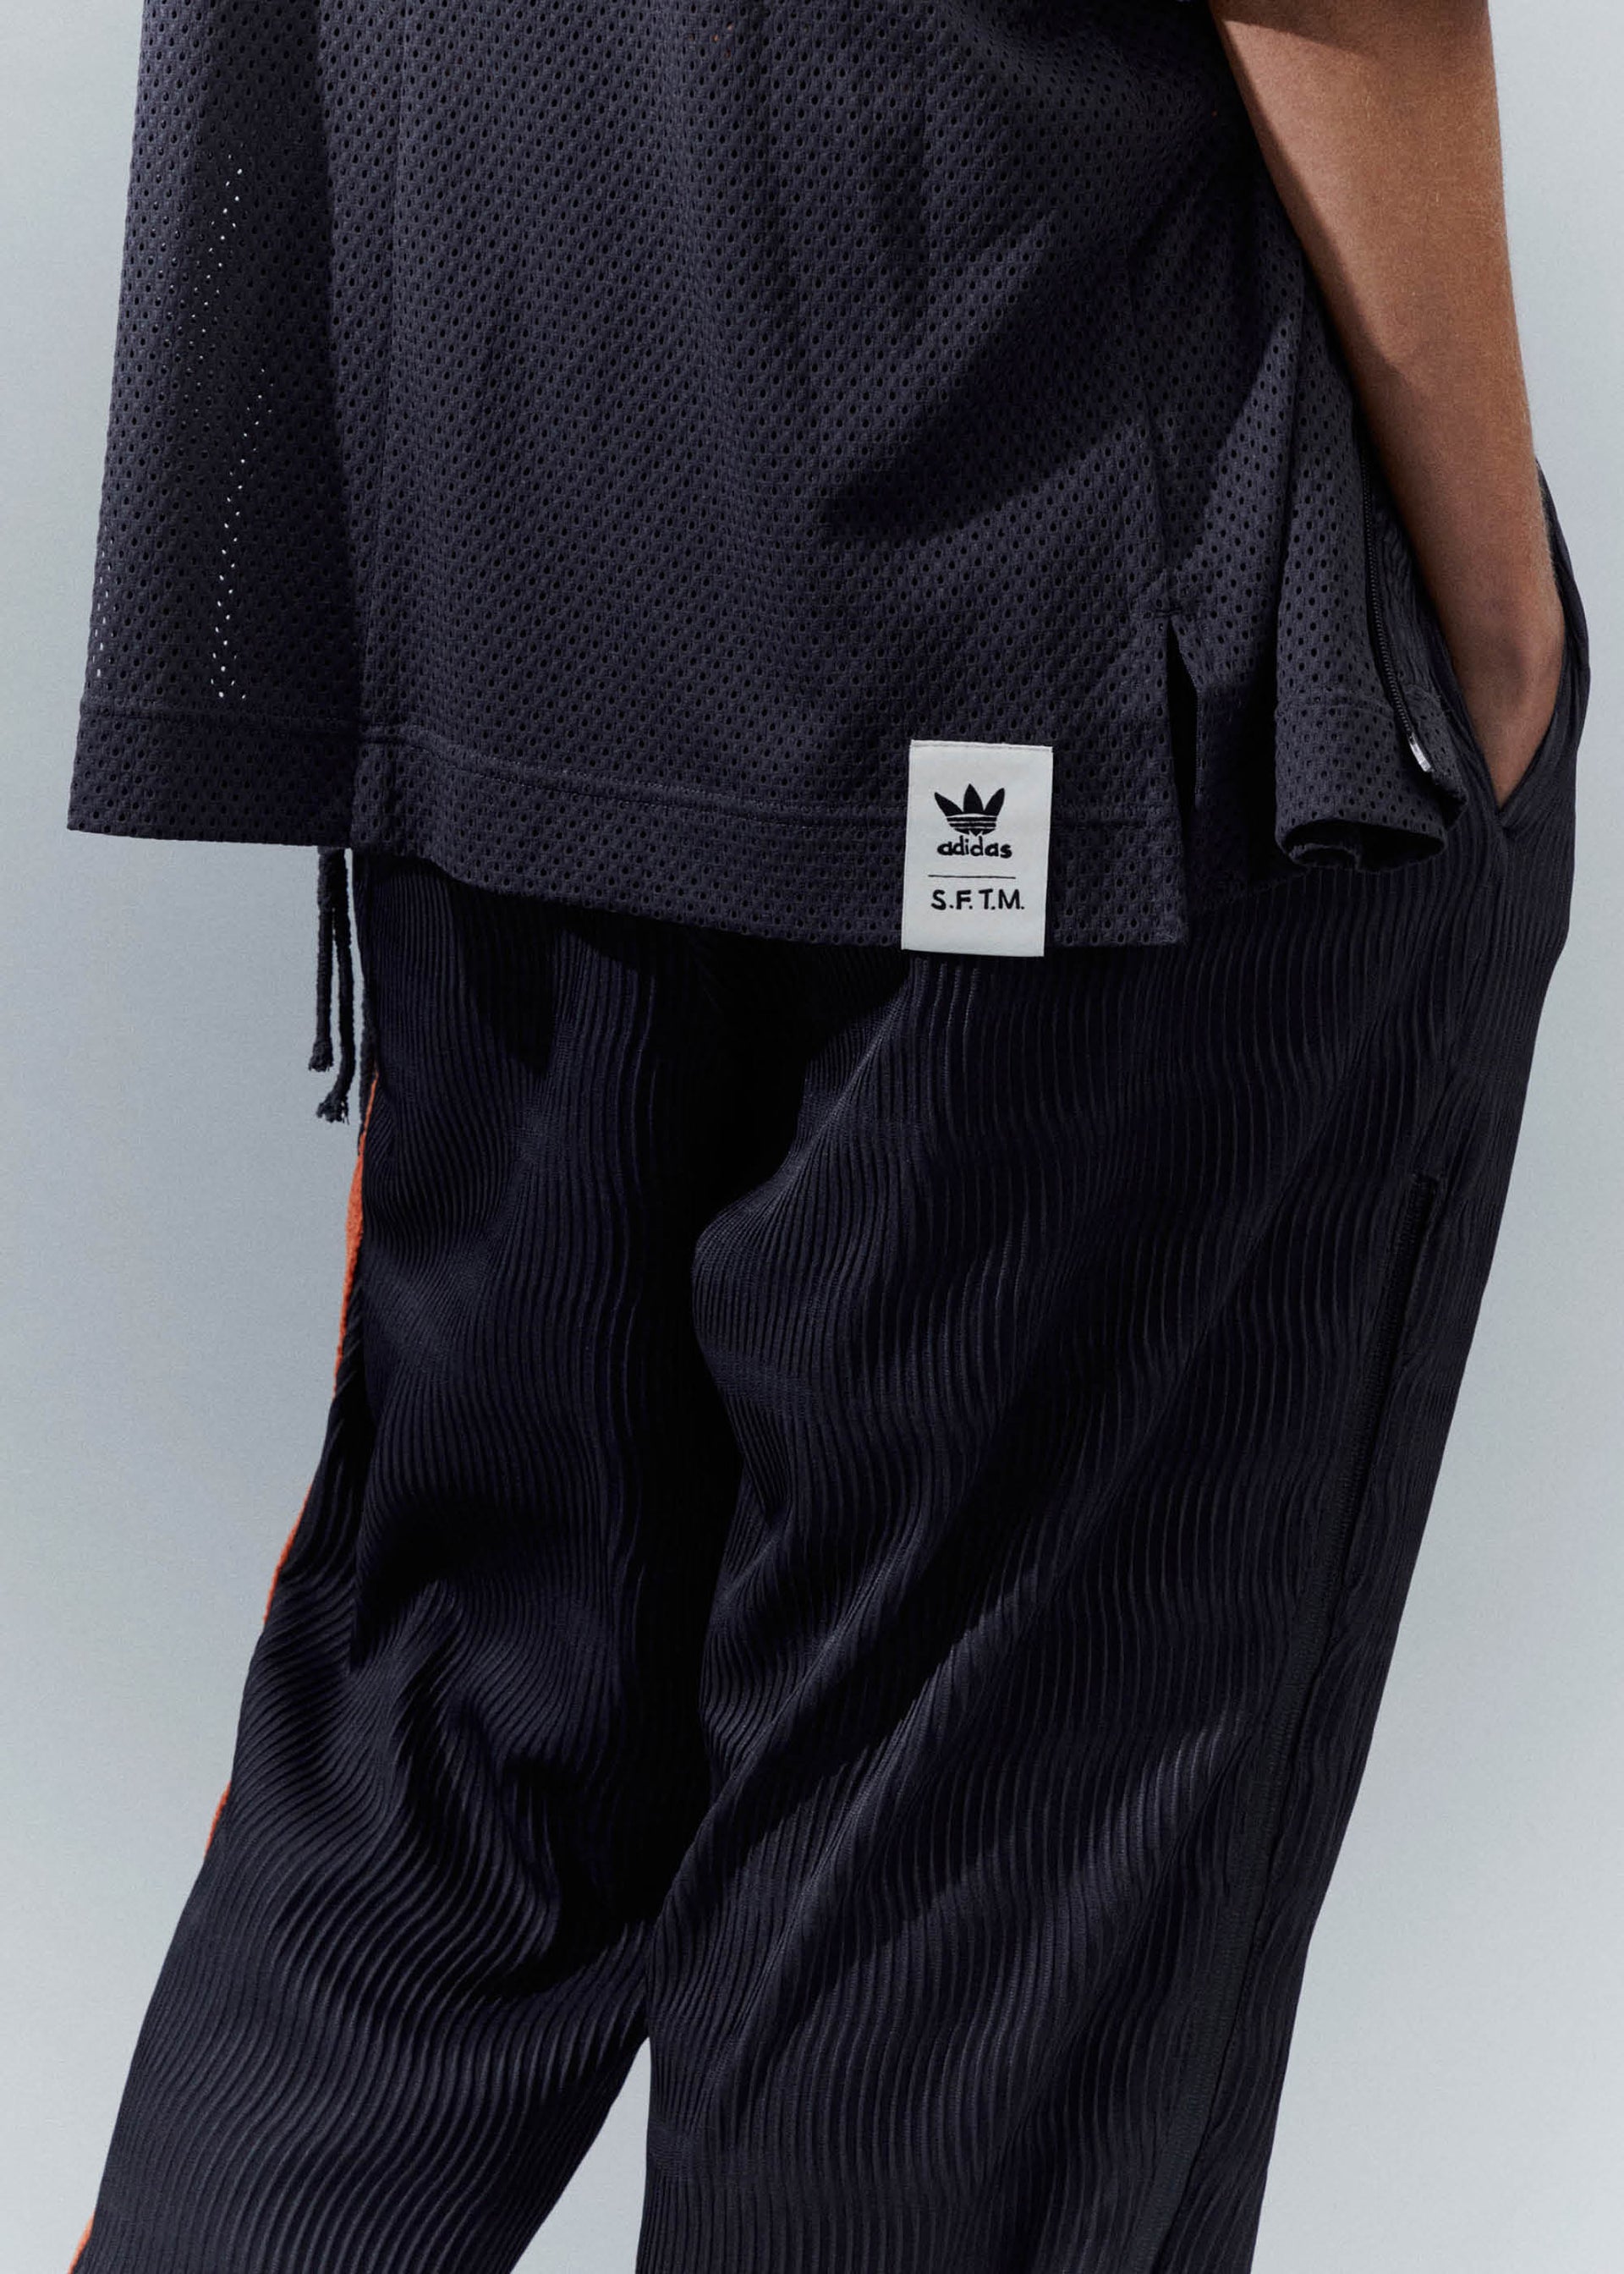 SONG FOR THE MUTE X ADIDAS Unisex Pants – Atelier New York